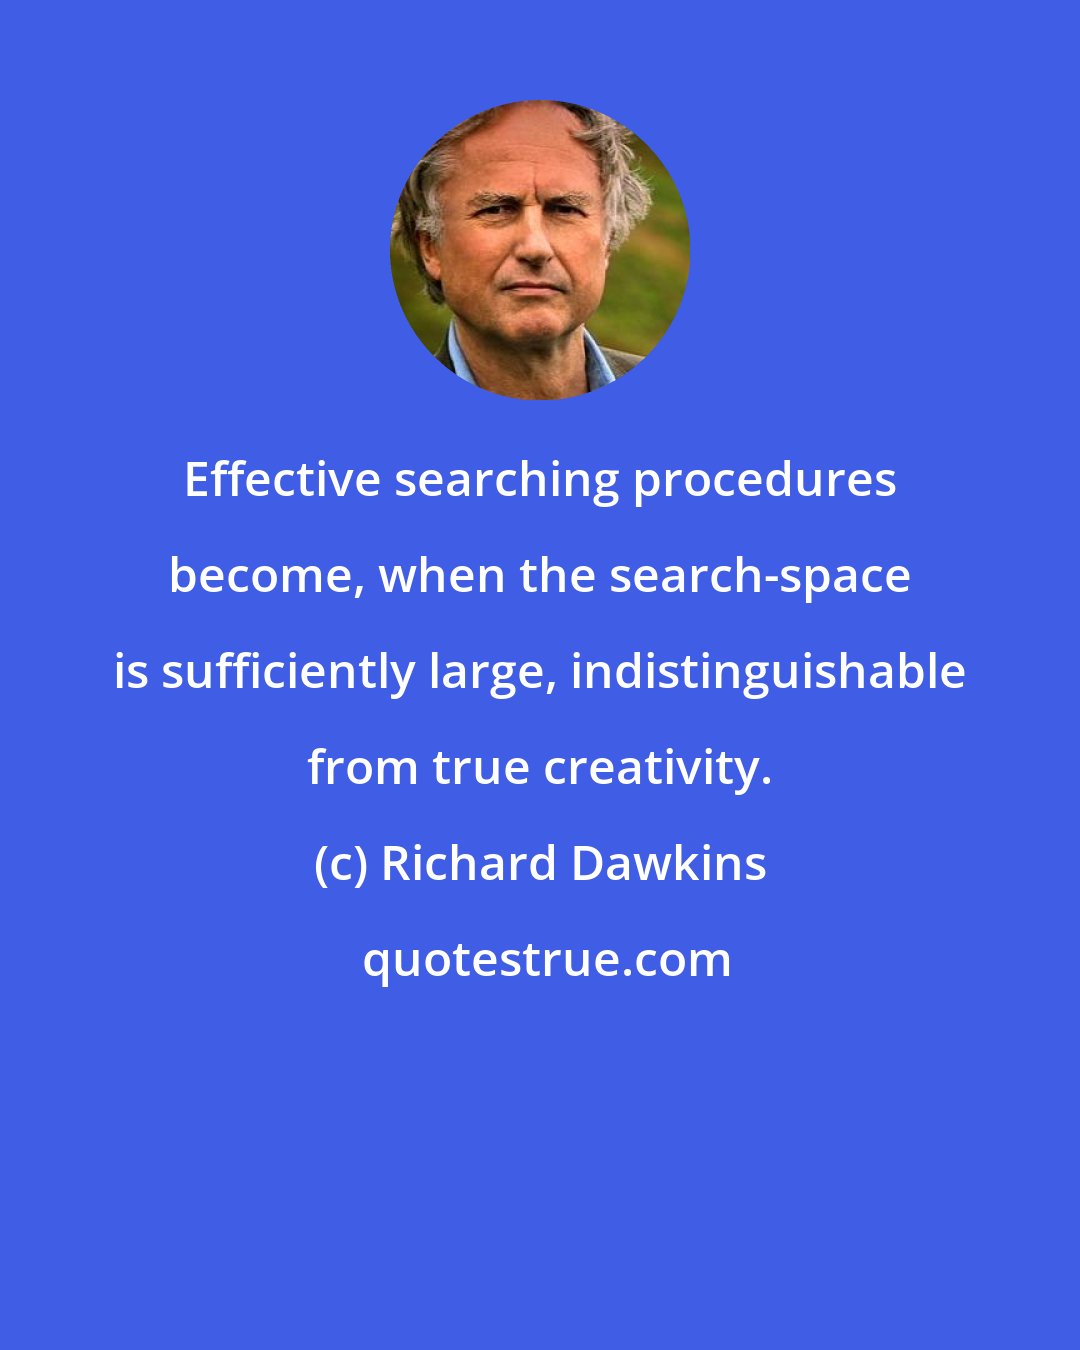 Richard Dawkins: Effective searching procedures become, when the search-space is sufficiently large, indistinguishable from true creativity.